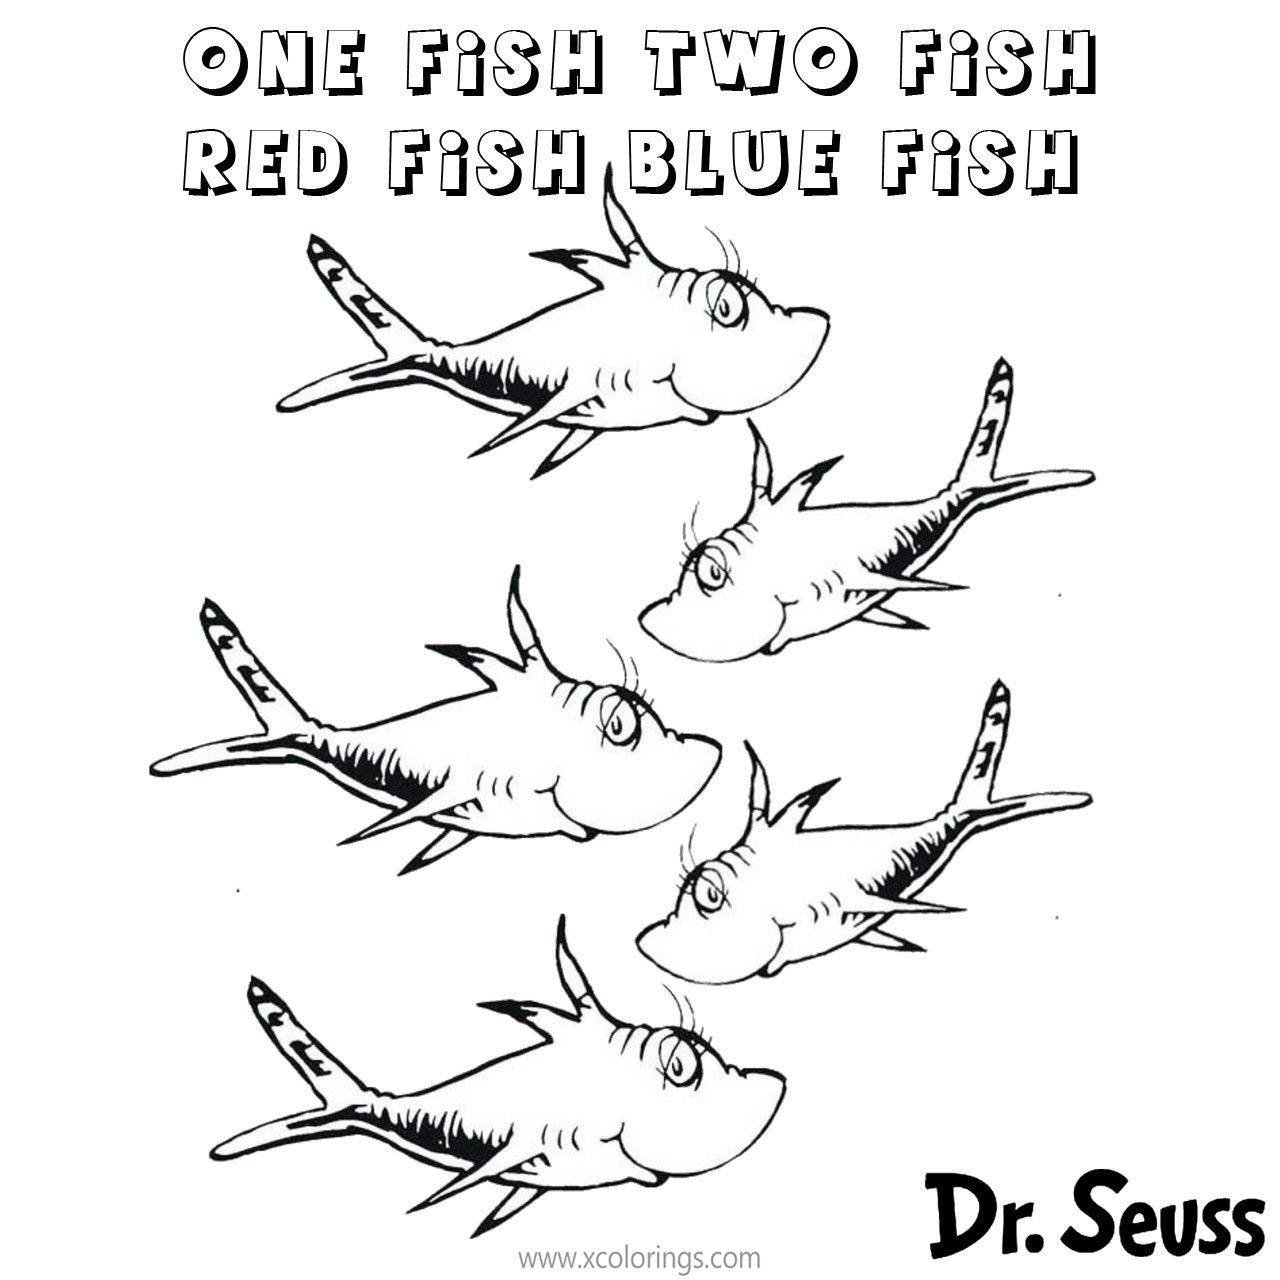 One Fish Two Fish Coloring Pages from Dr. Seuss Books - XColorings.com